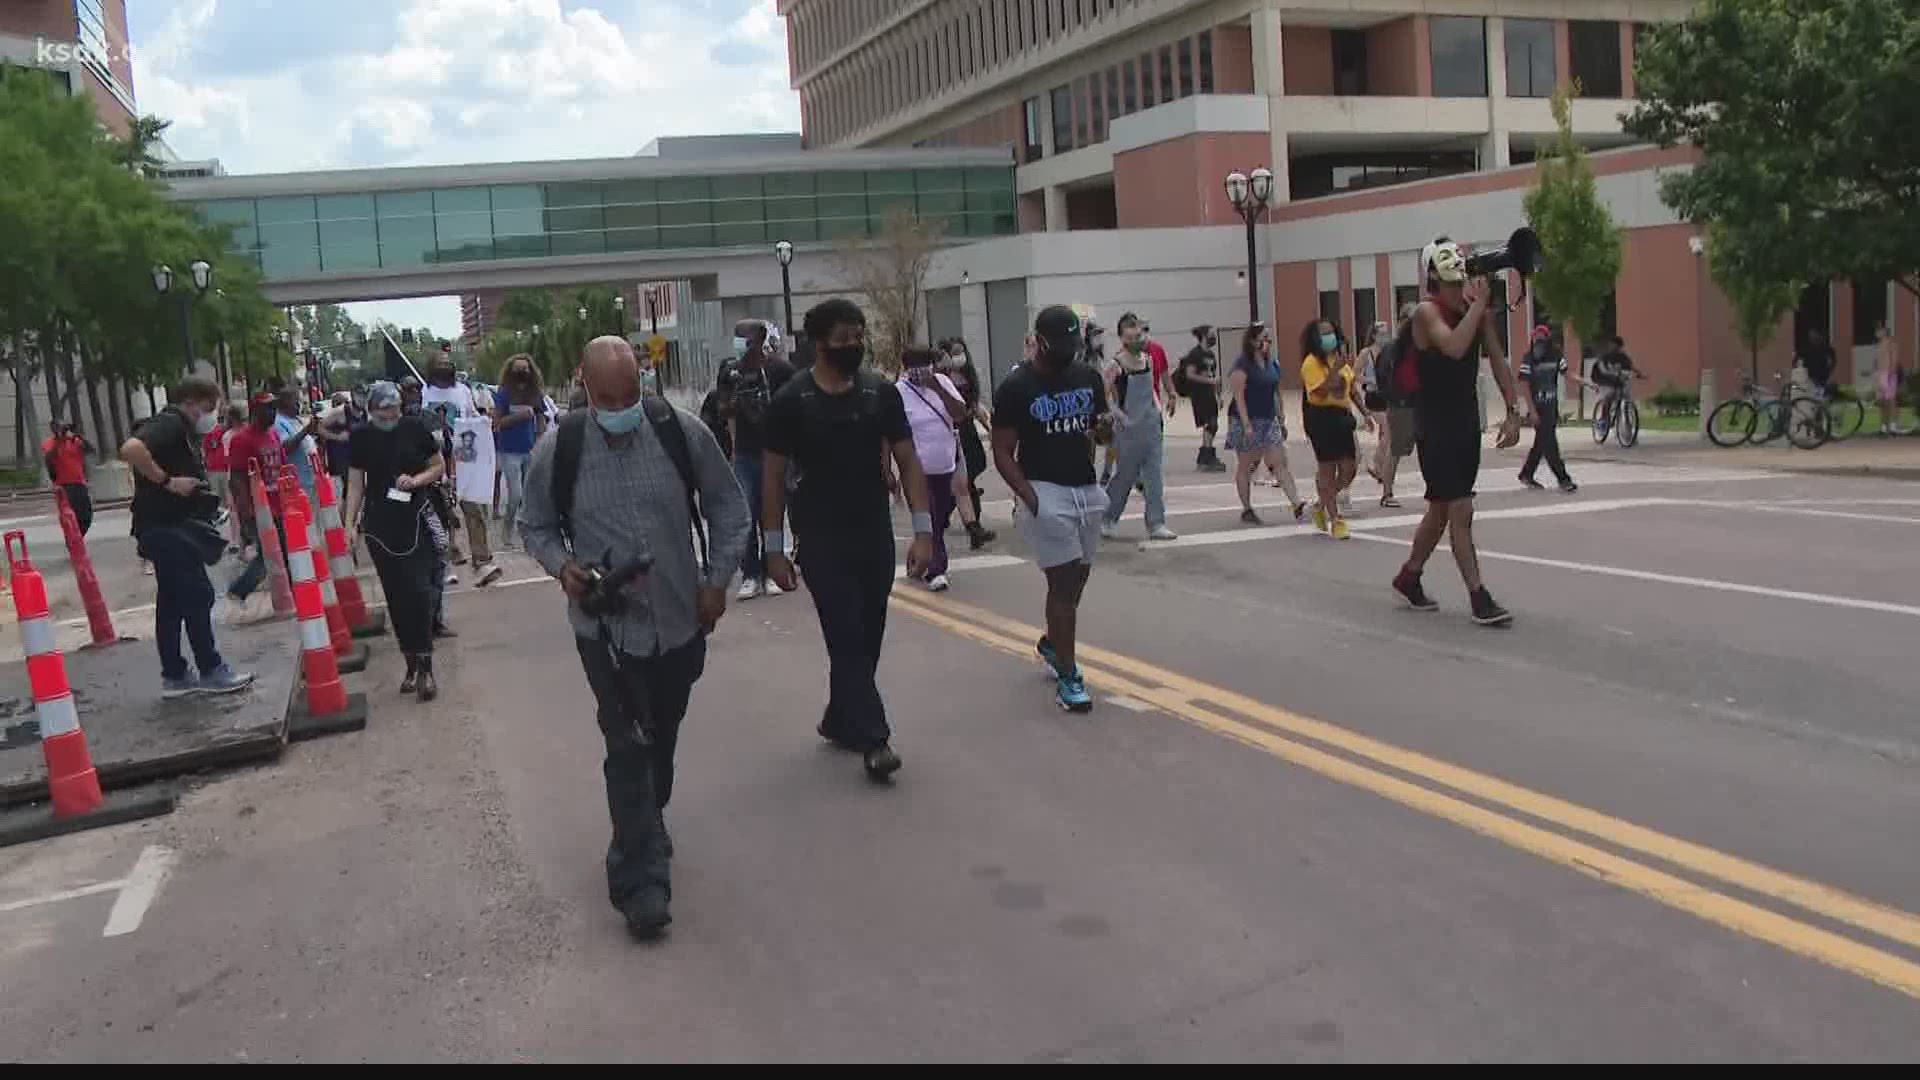 Demonstrators planned to meet at 2 p.m. outside the Buzz Westfall Justice Center